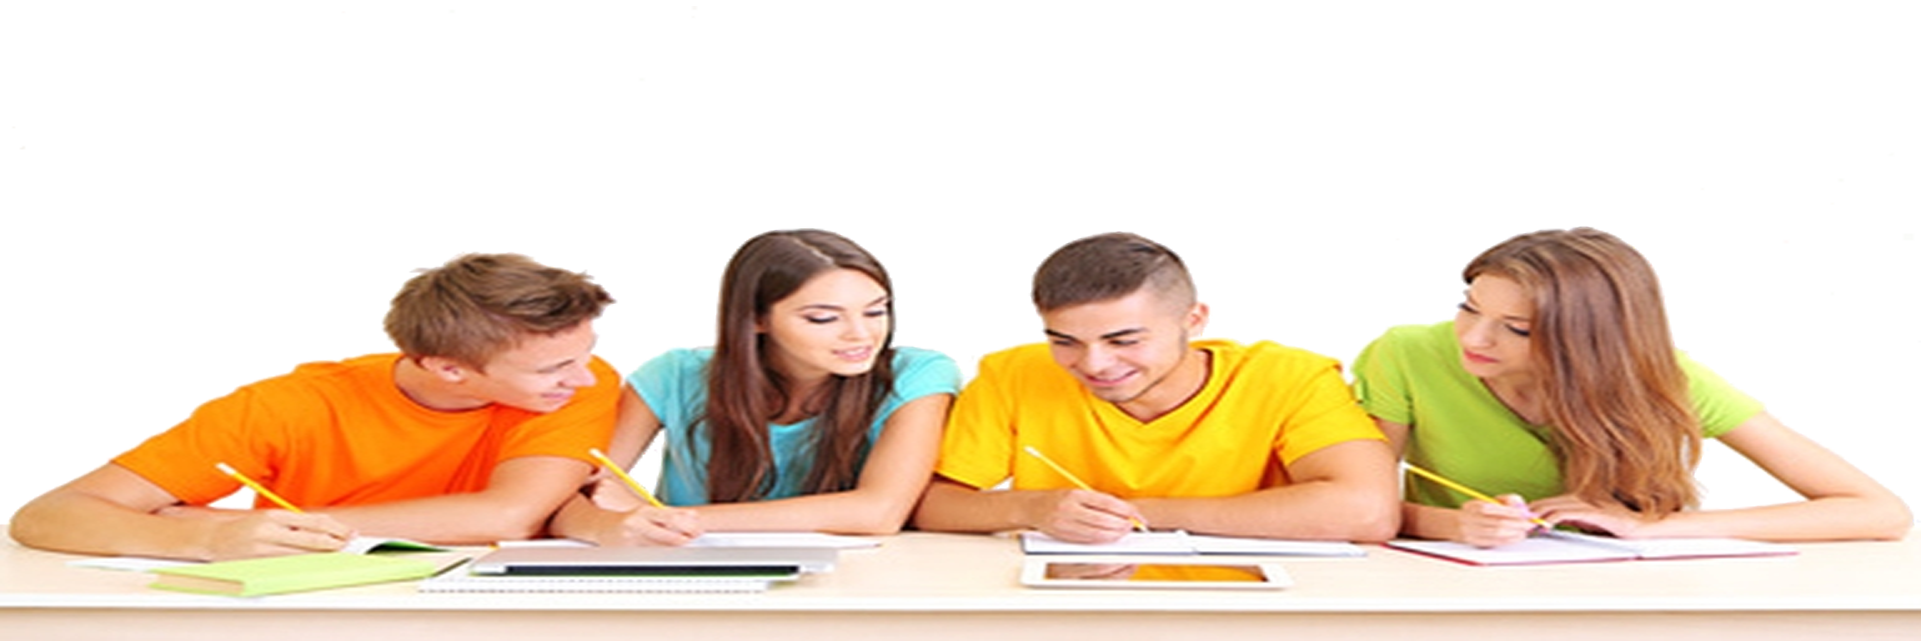 PNG Student Studying - 61160